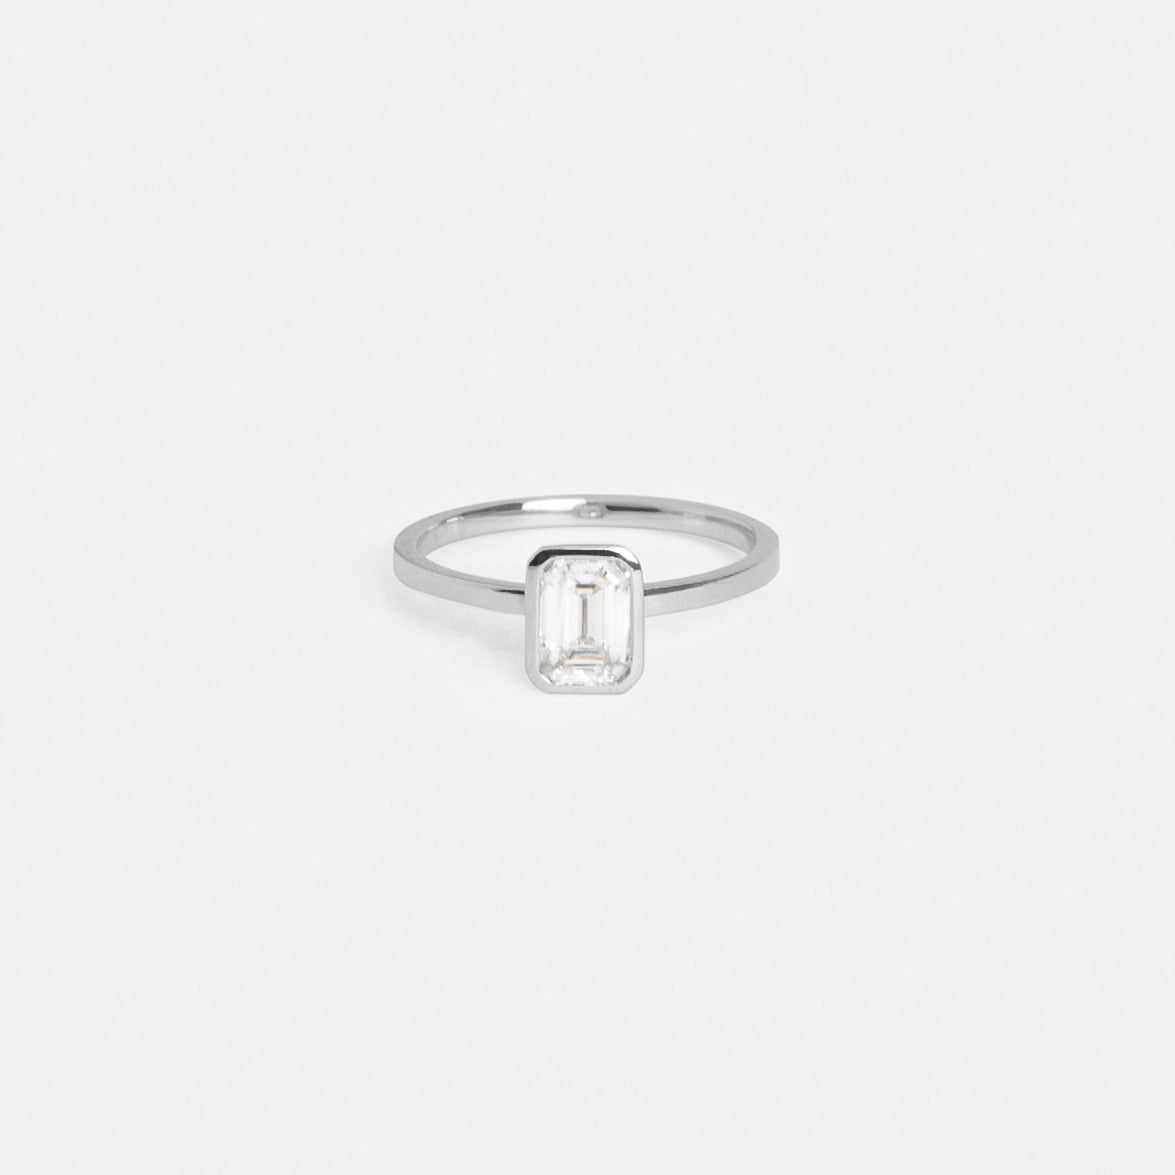 Auda Minimal Ring in Platinum set with a 0.82ct emerald cut natural diamond By SHW Fine Jewelry NYC